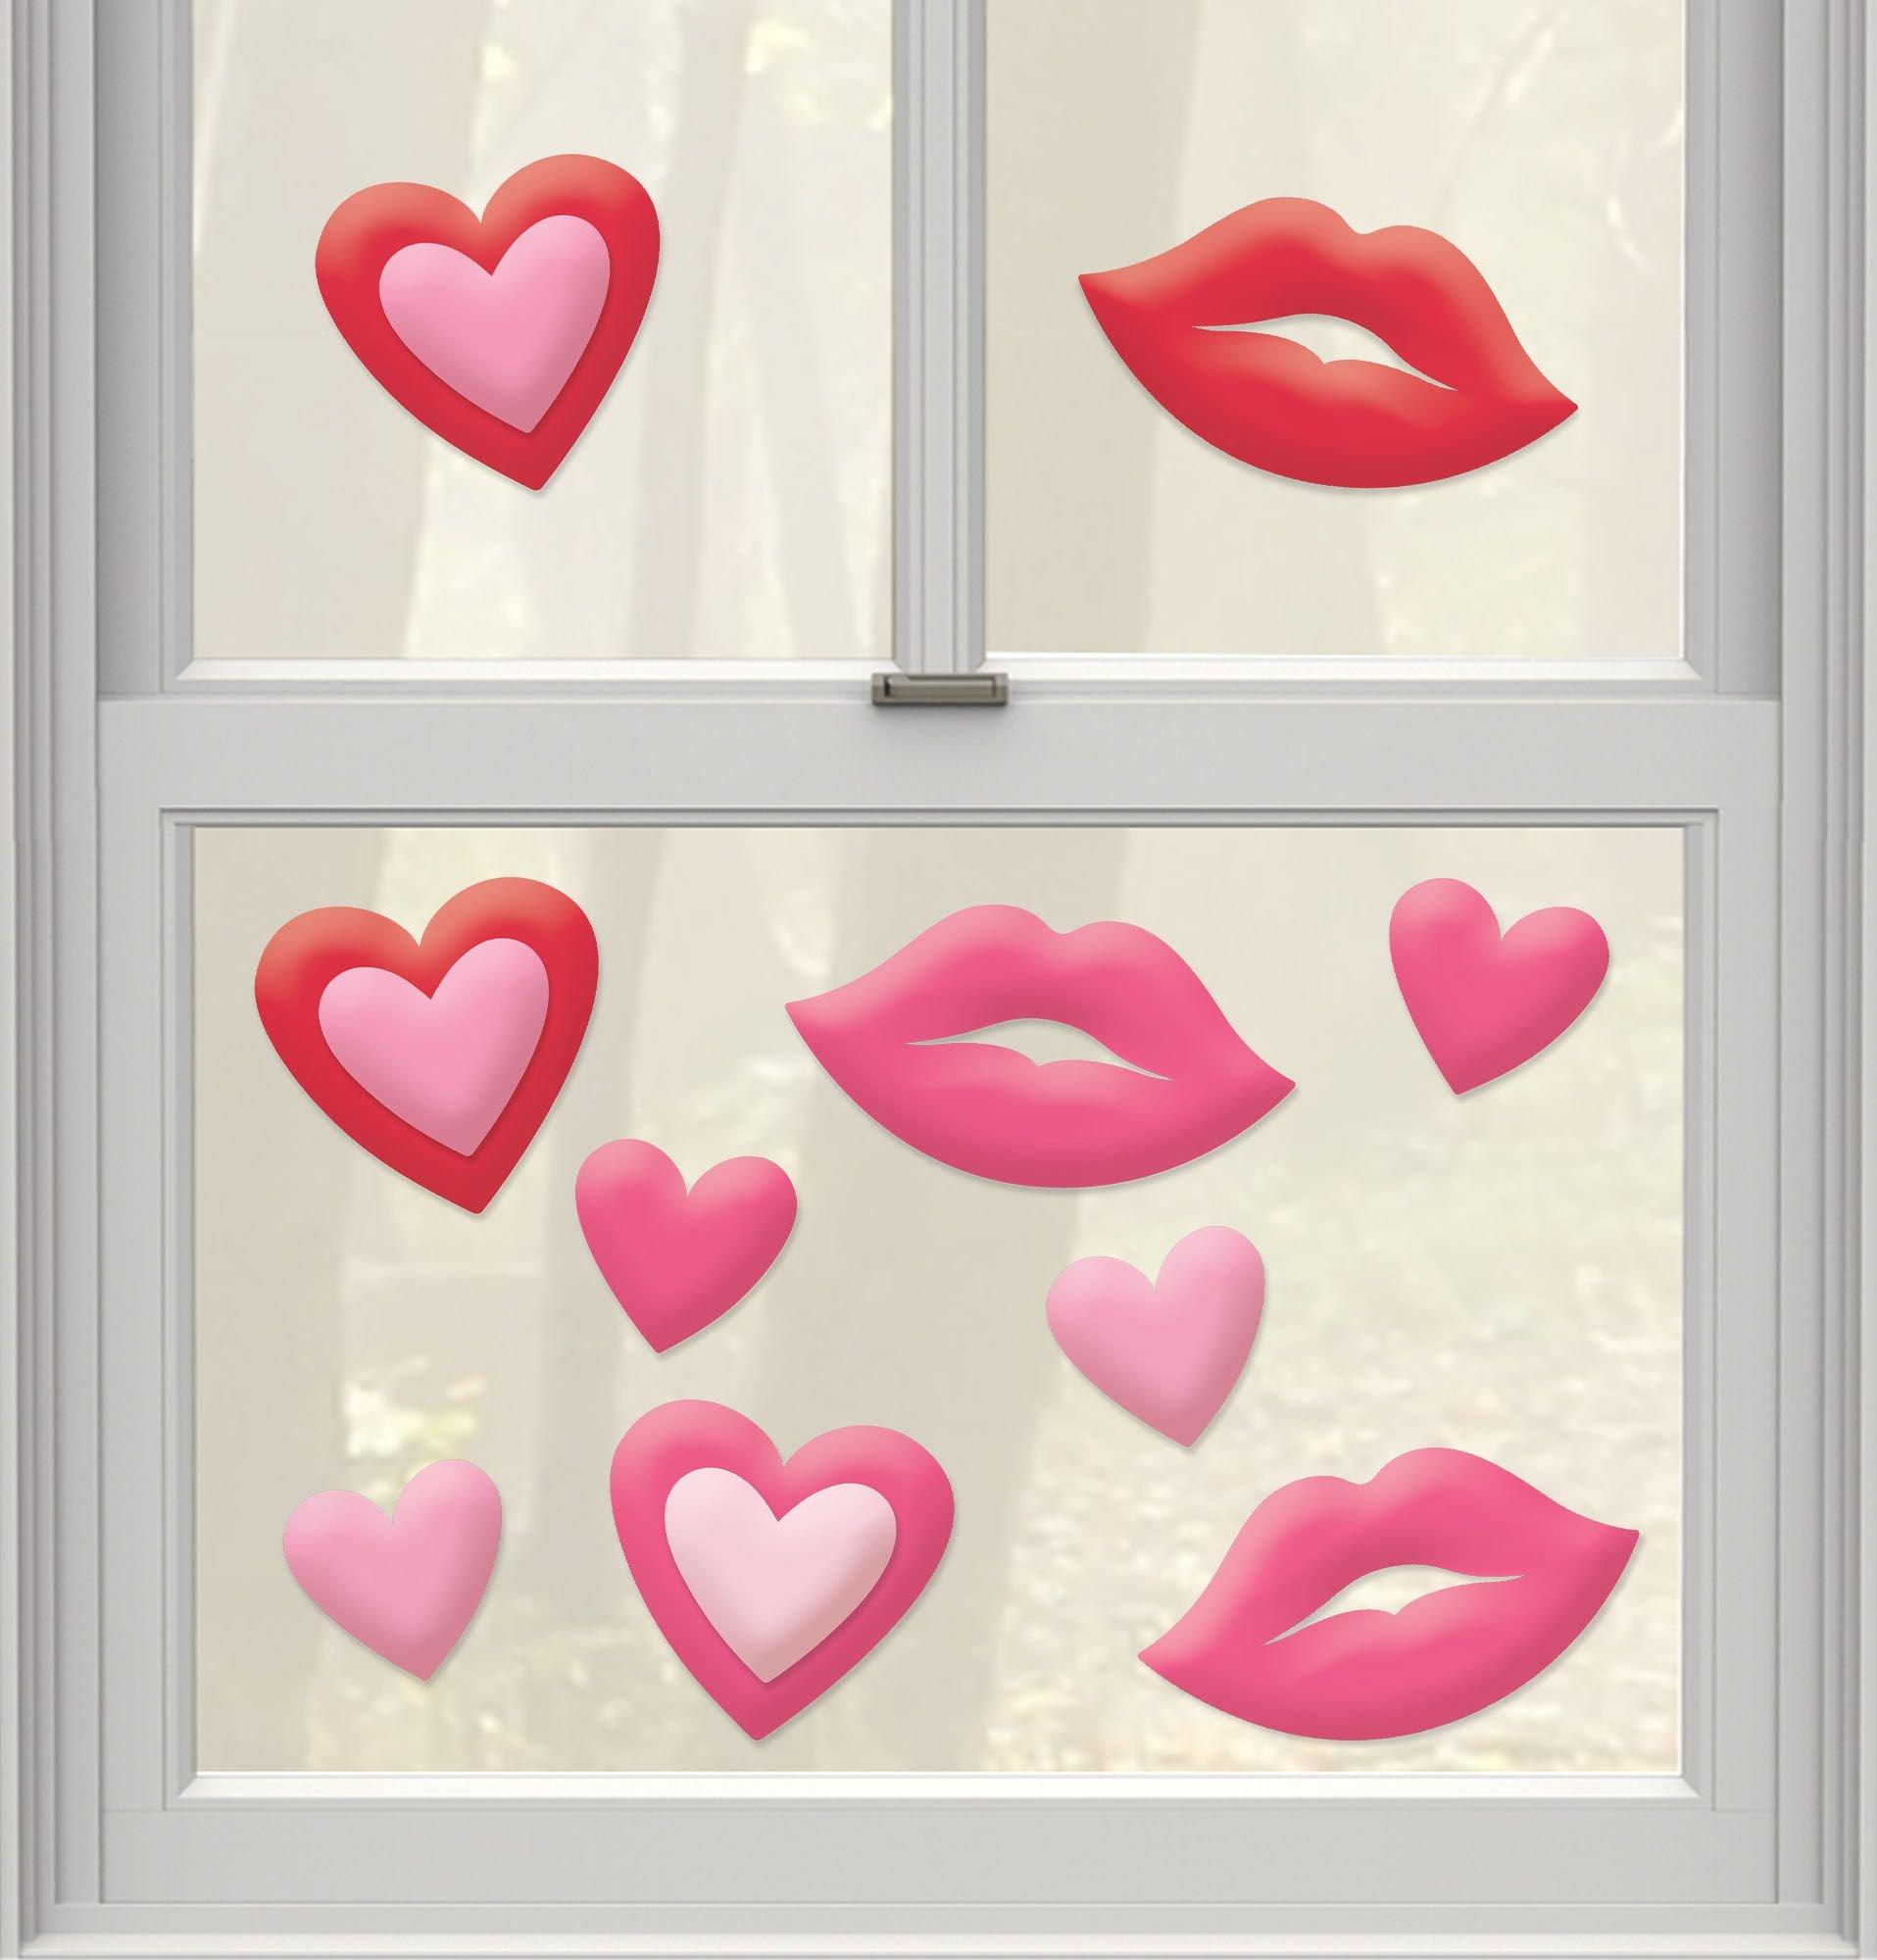 Hearts & Lips Gel Cling Decals, 10pc